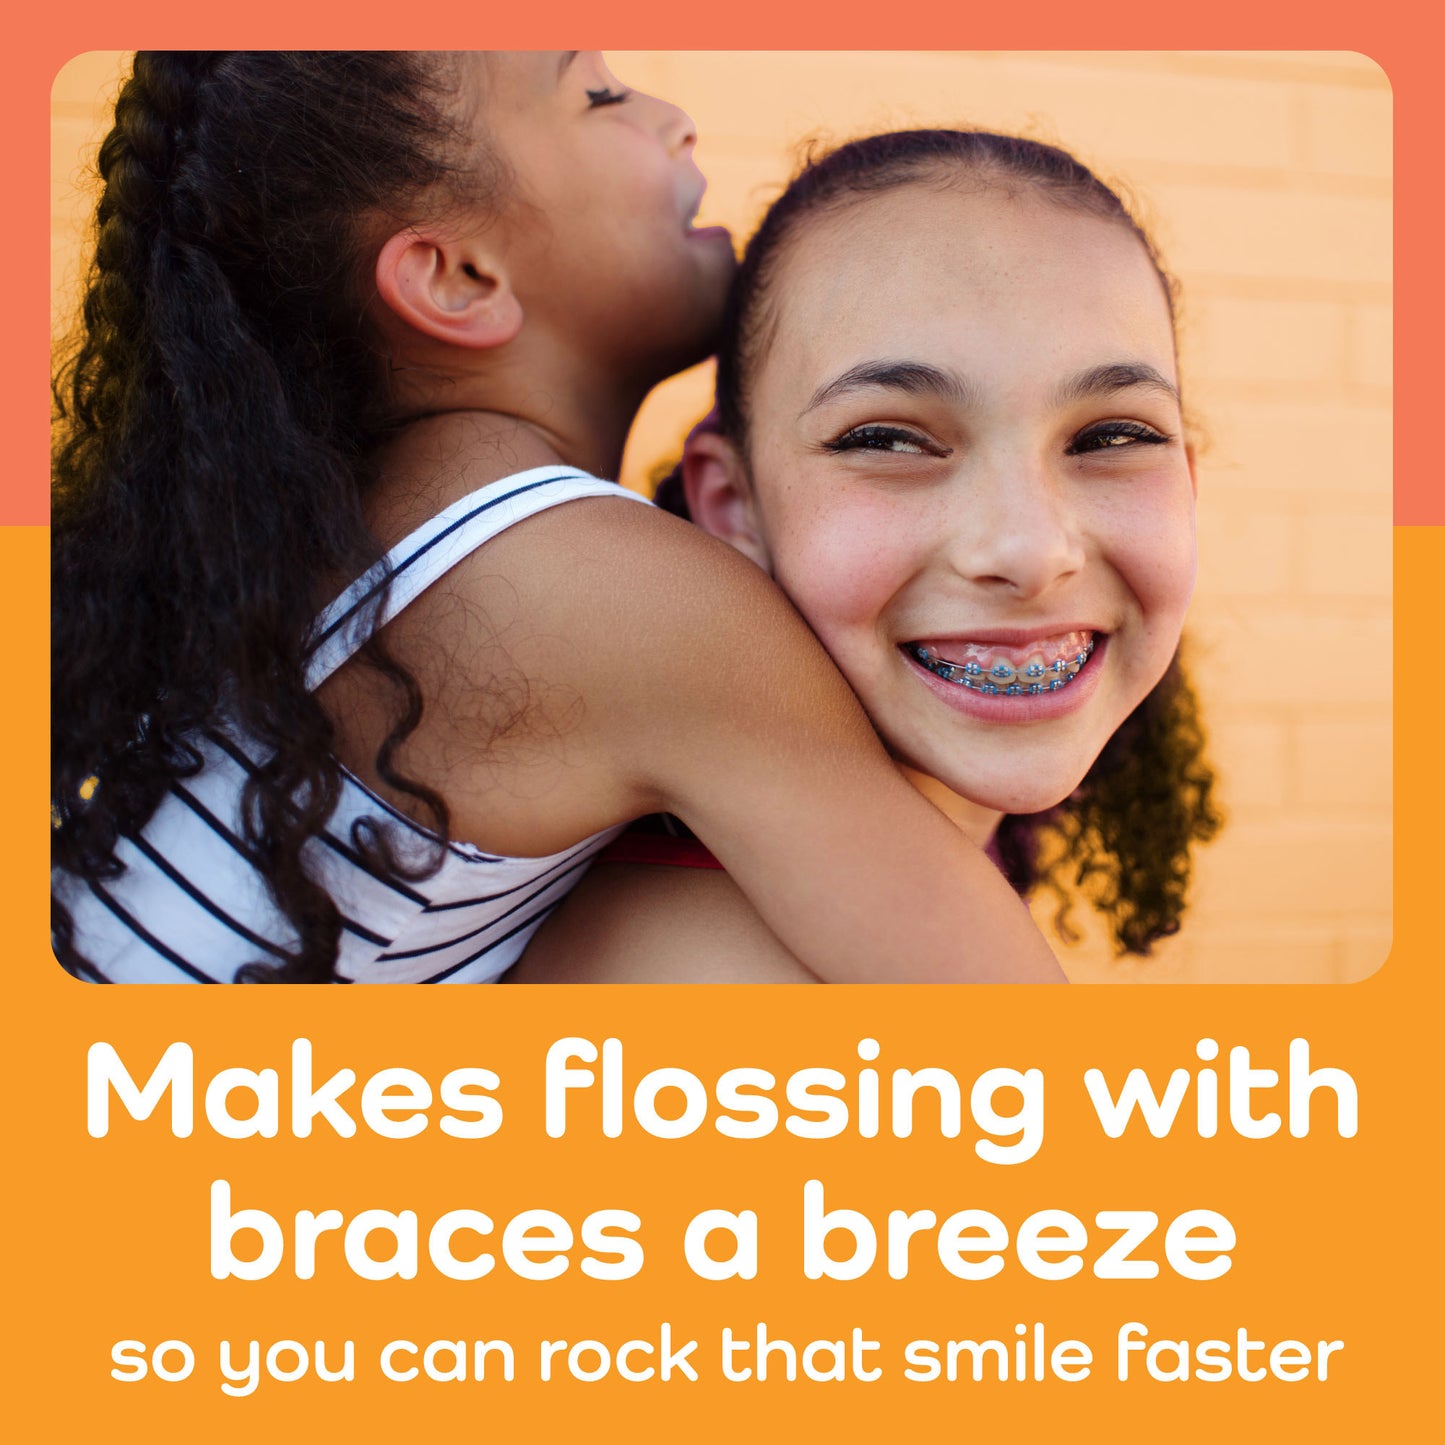 Makes flossing with braces a breeze so you can rock that smile faster